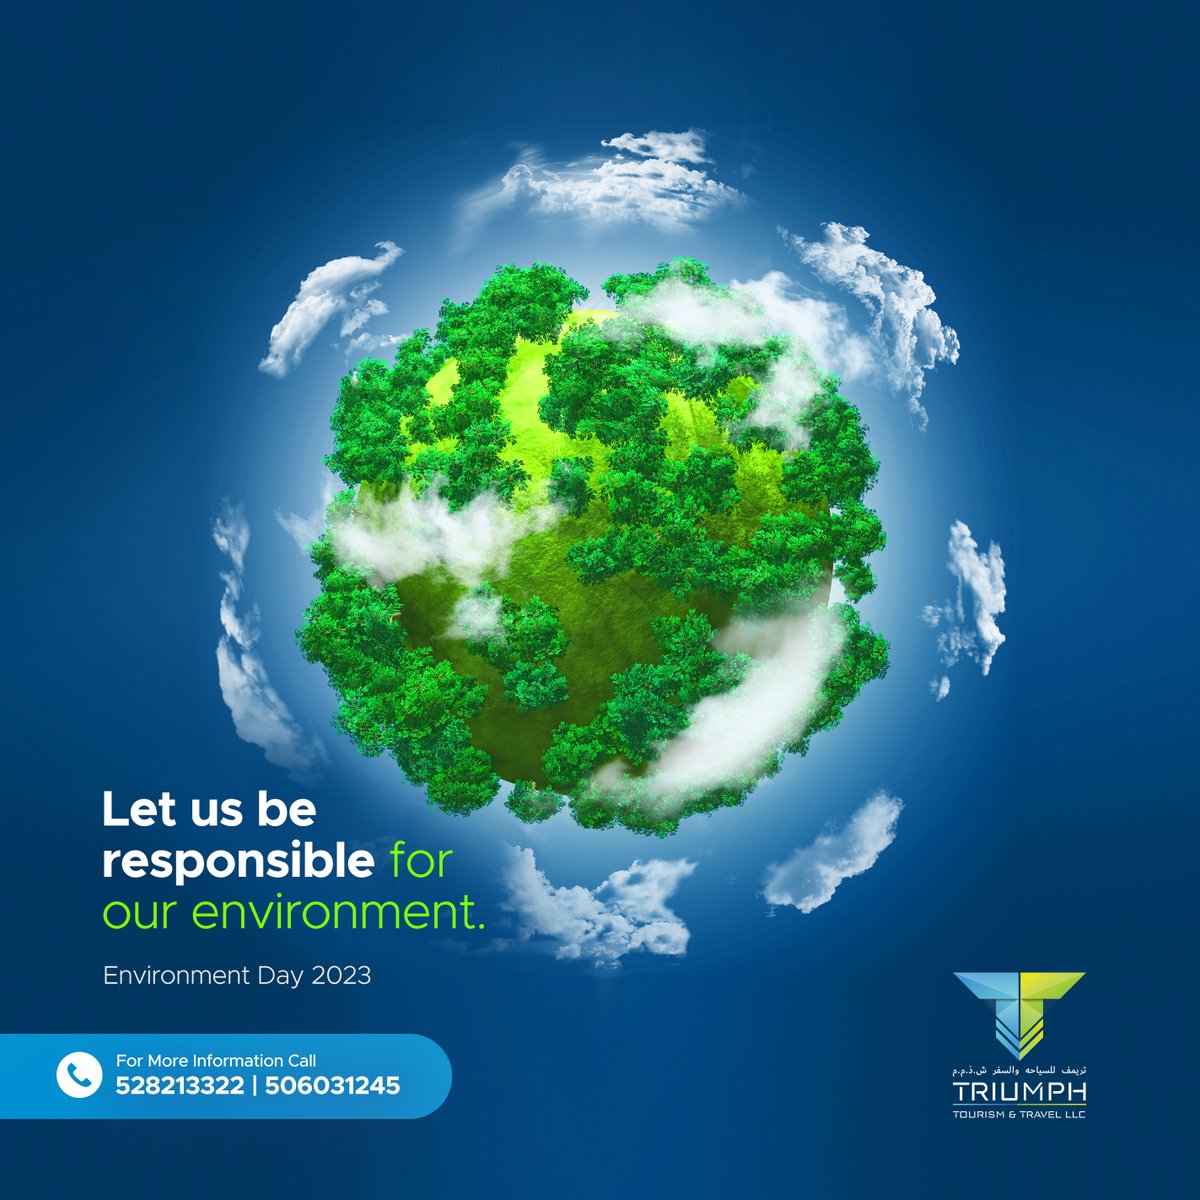 Let us be responsible for our environment.
This Environment Day, make a commitment to protect the planet and travel responsibly with Triumph Travels! 

#triumphtravels #environmentallyfriendly #EnvironmentDay #worldtravel #NoPlasticChallenge #keepclean